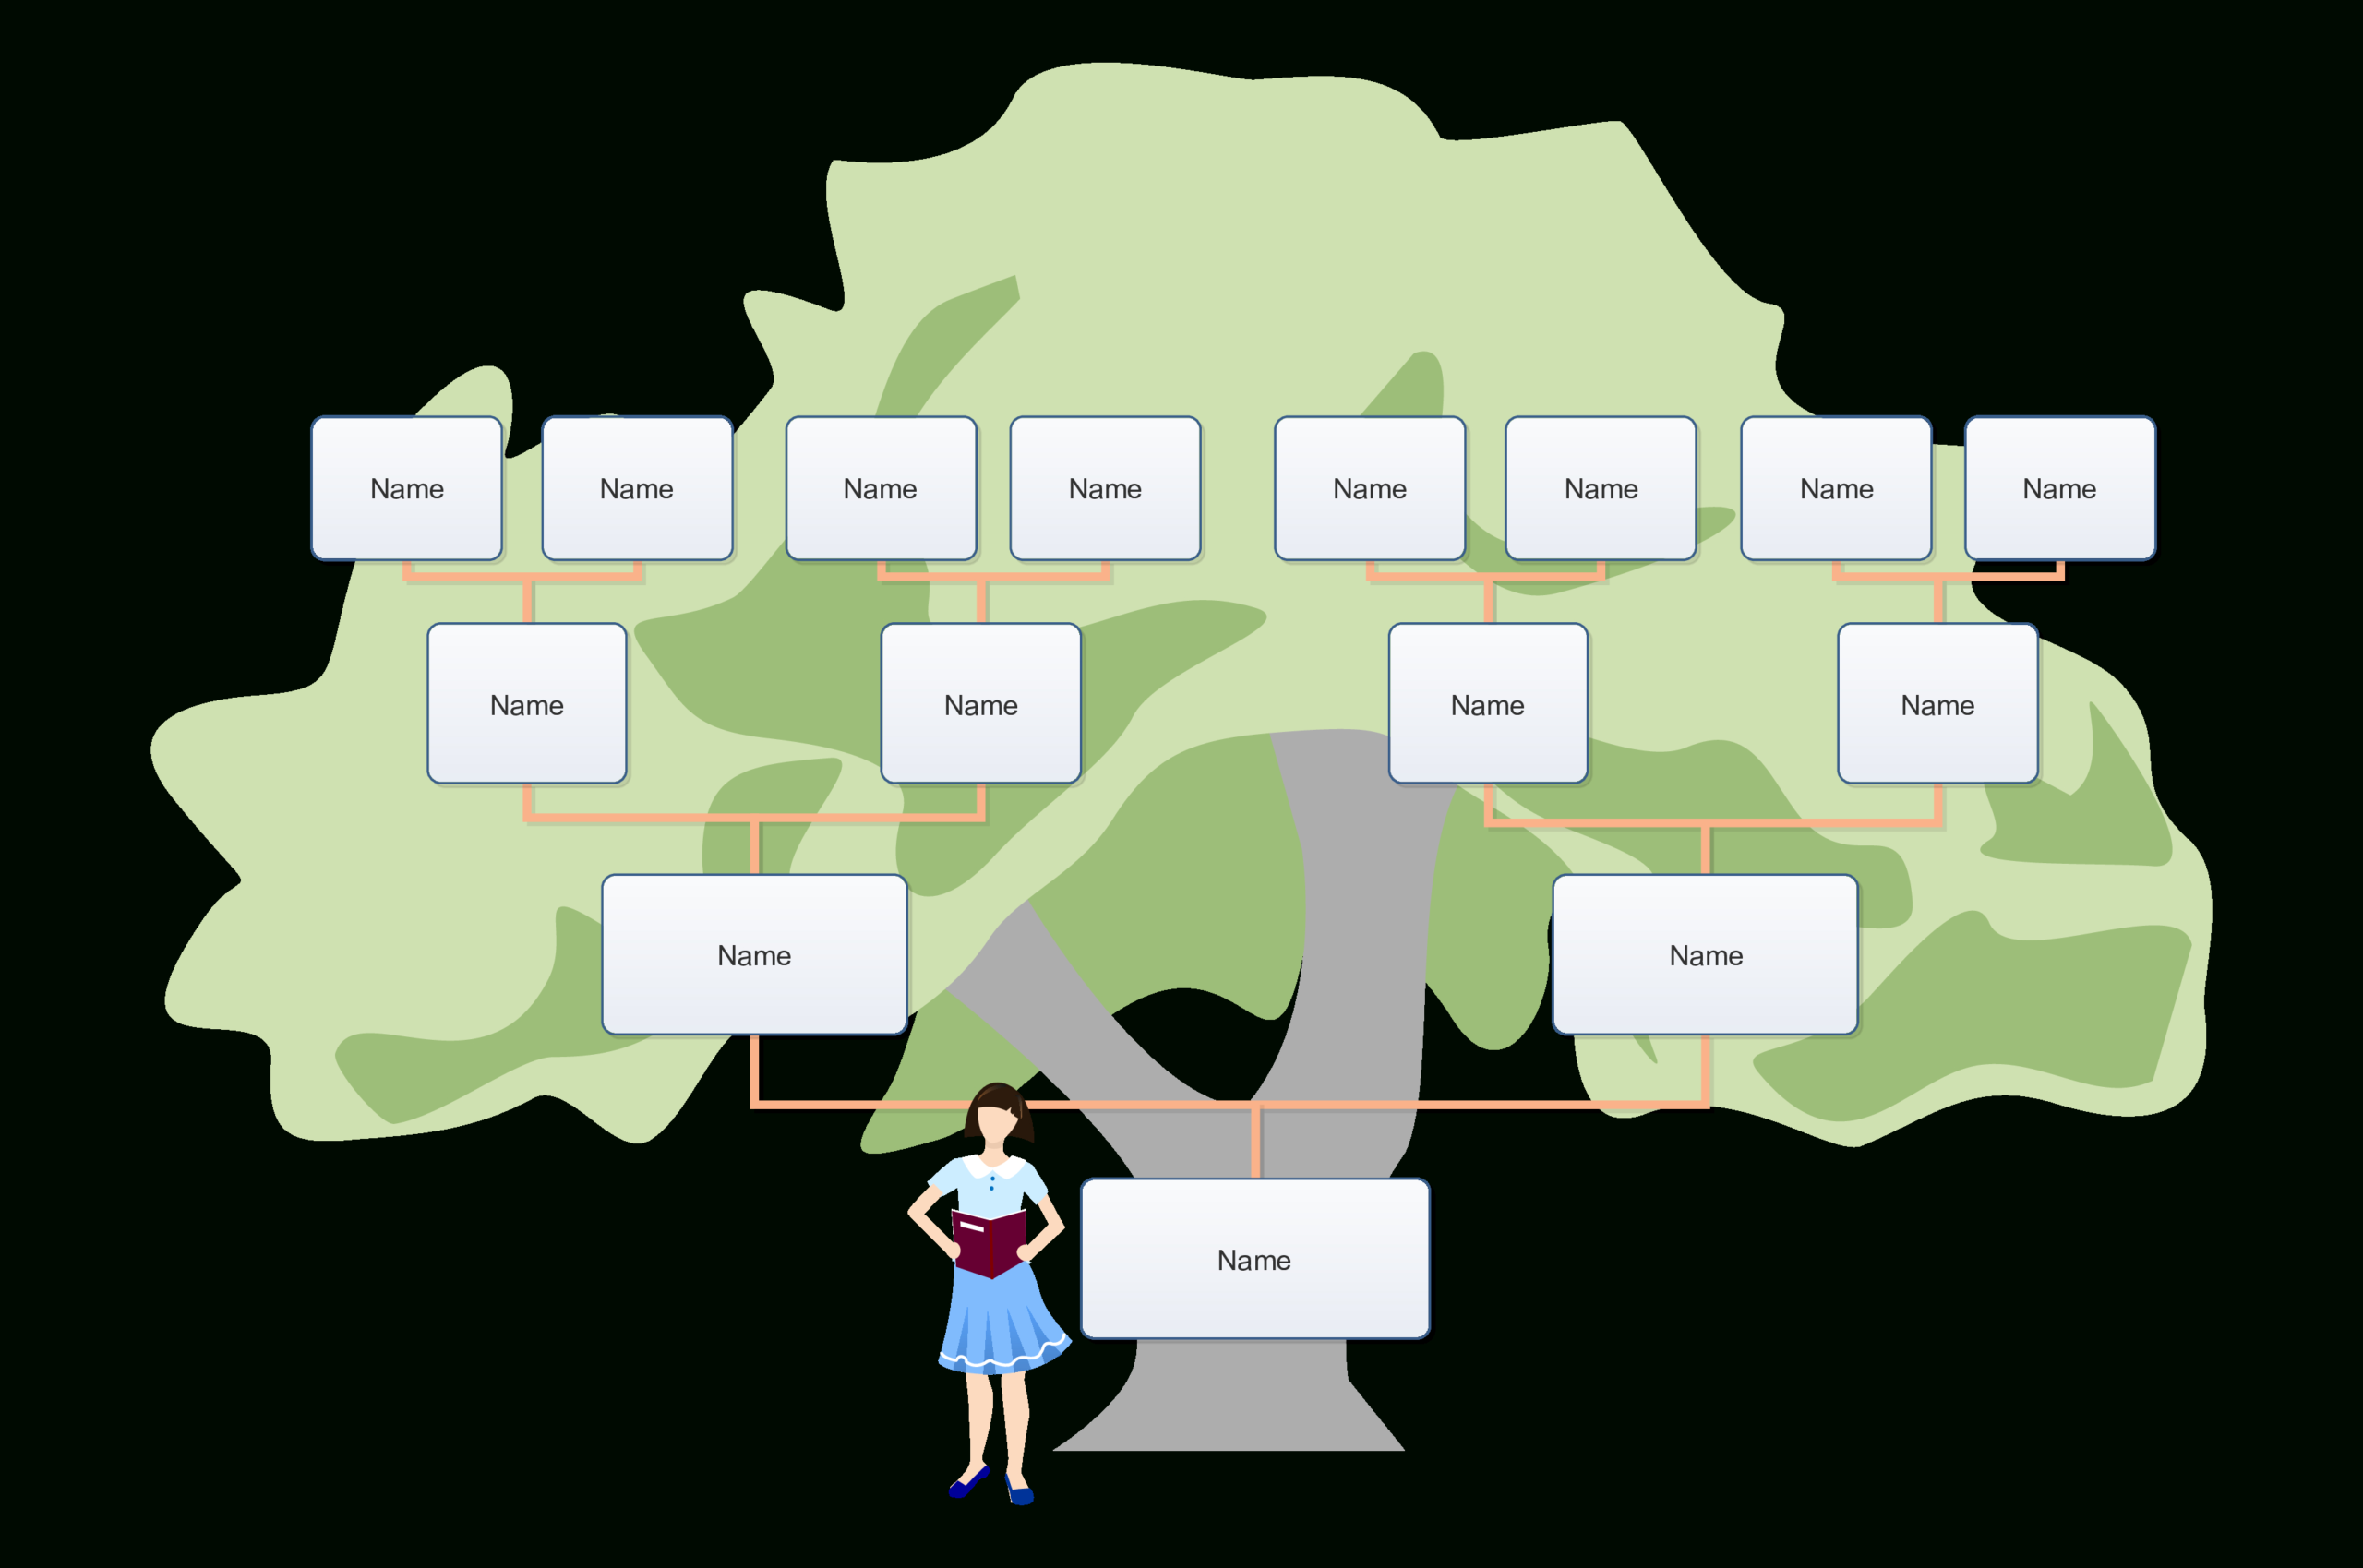 Blank Family Tree For Kids | Templates At Inside Fill In The Blank Family Tree Template